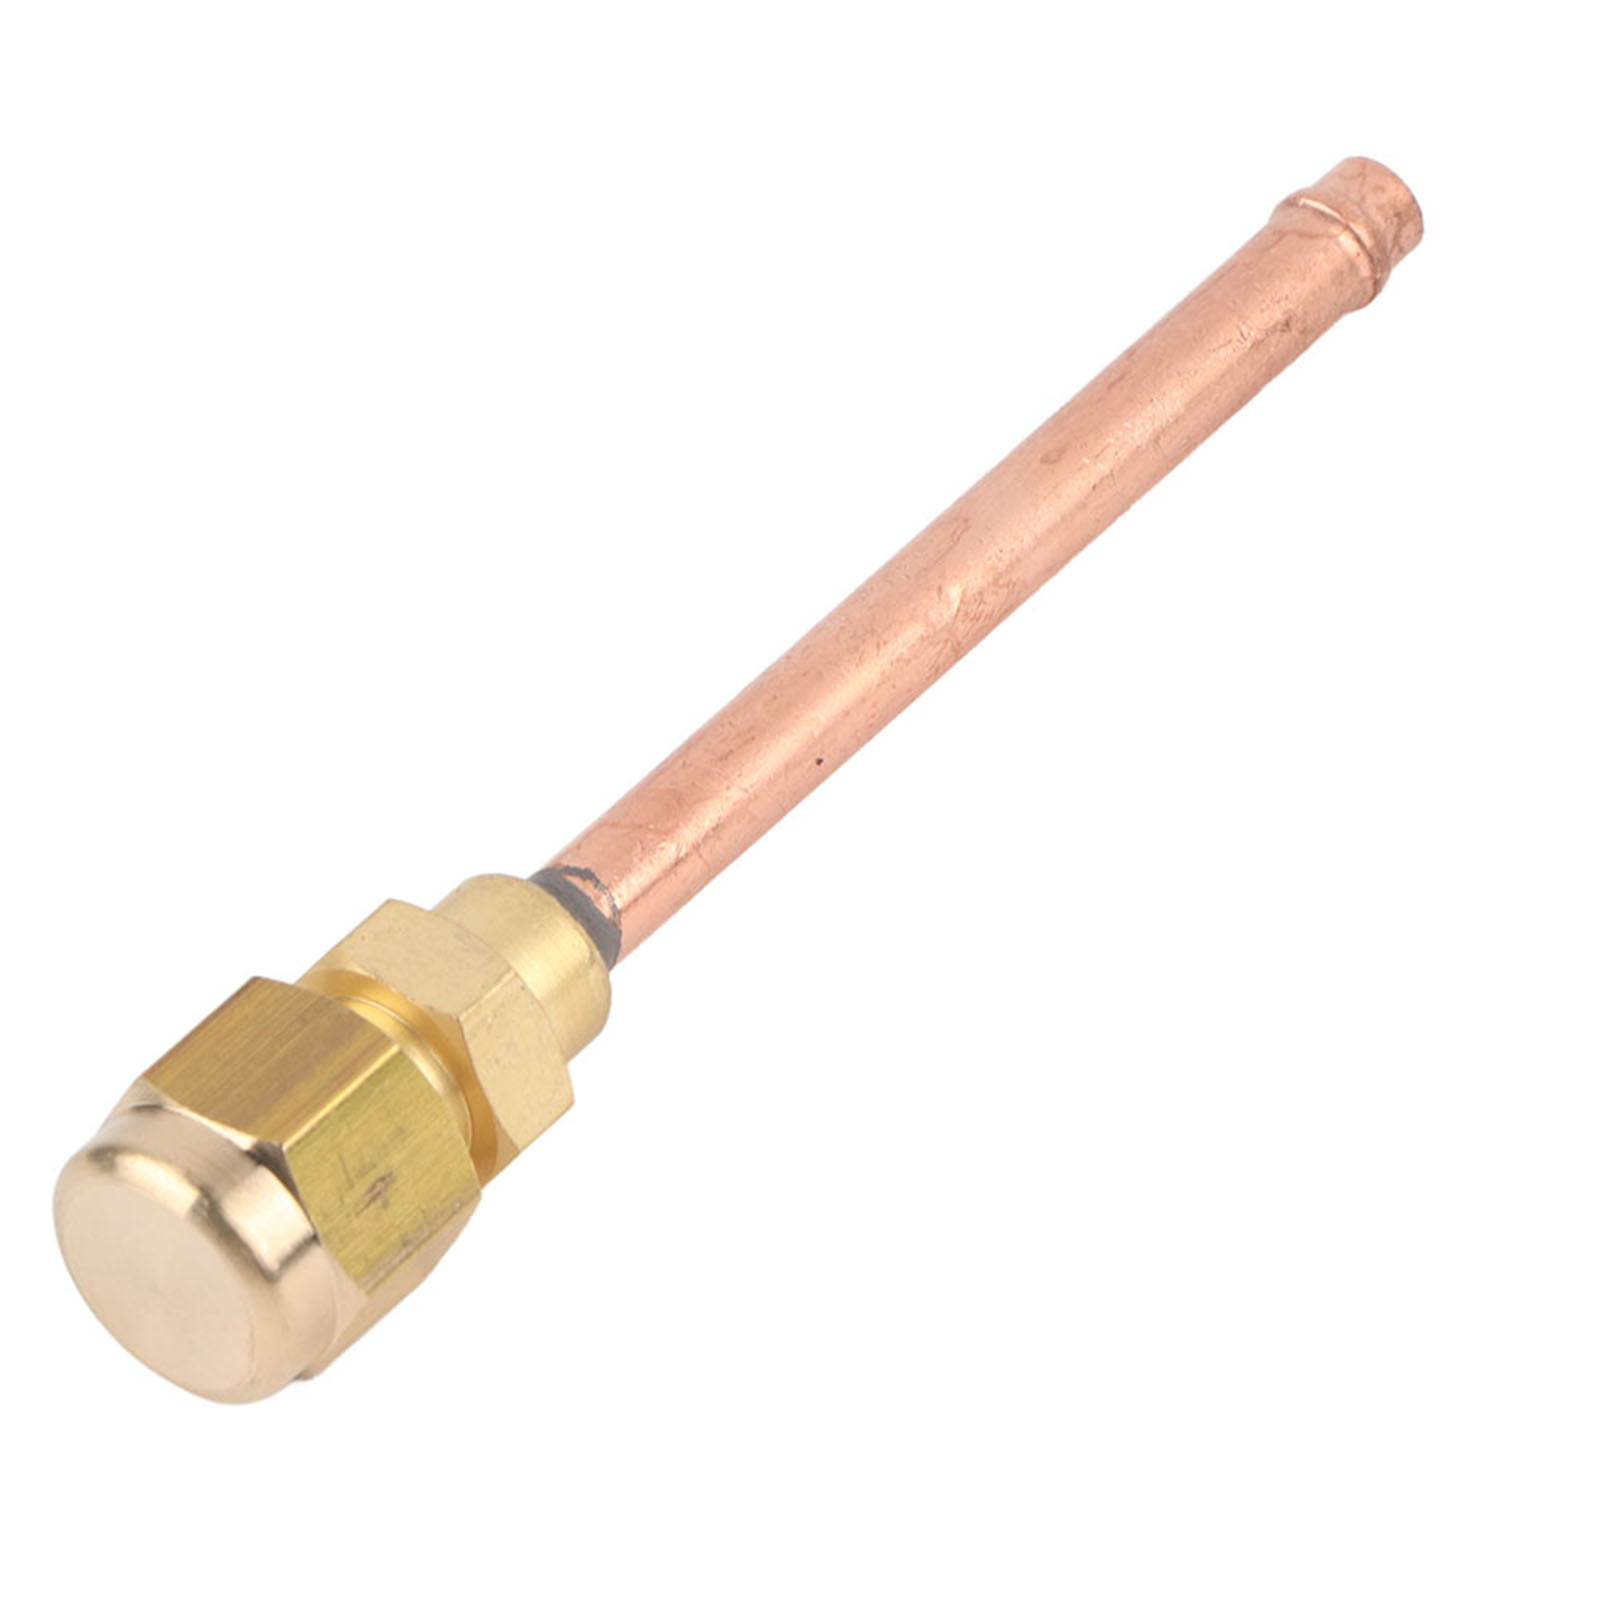 Brass Service Valve Welding Connection Manual Driving Mode Single Direction Access Home Improvement Valve R410 